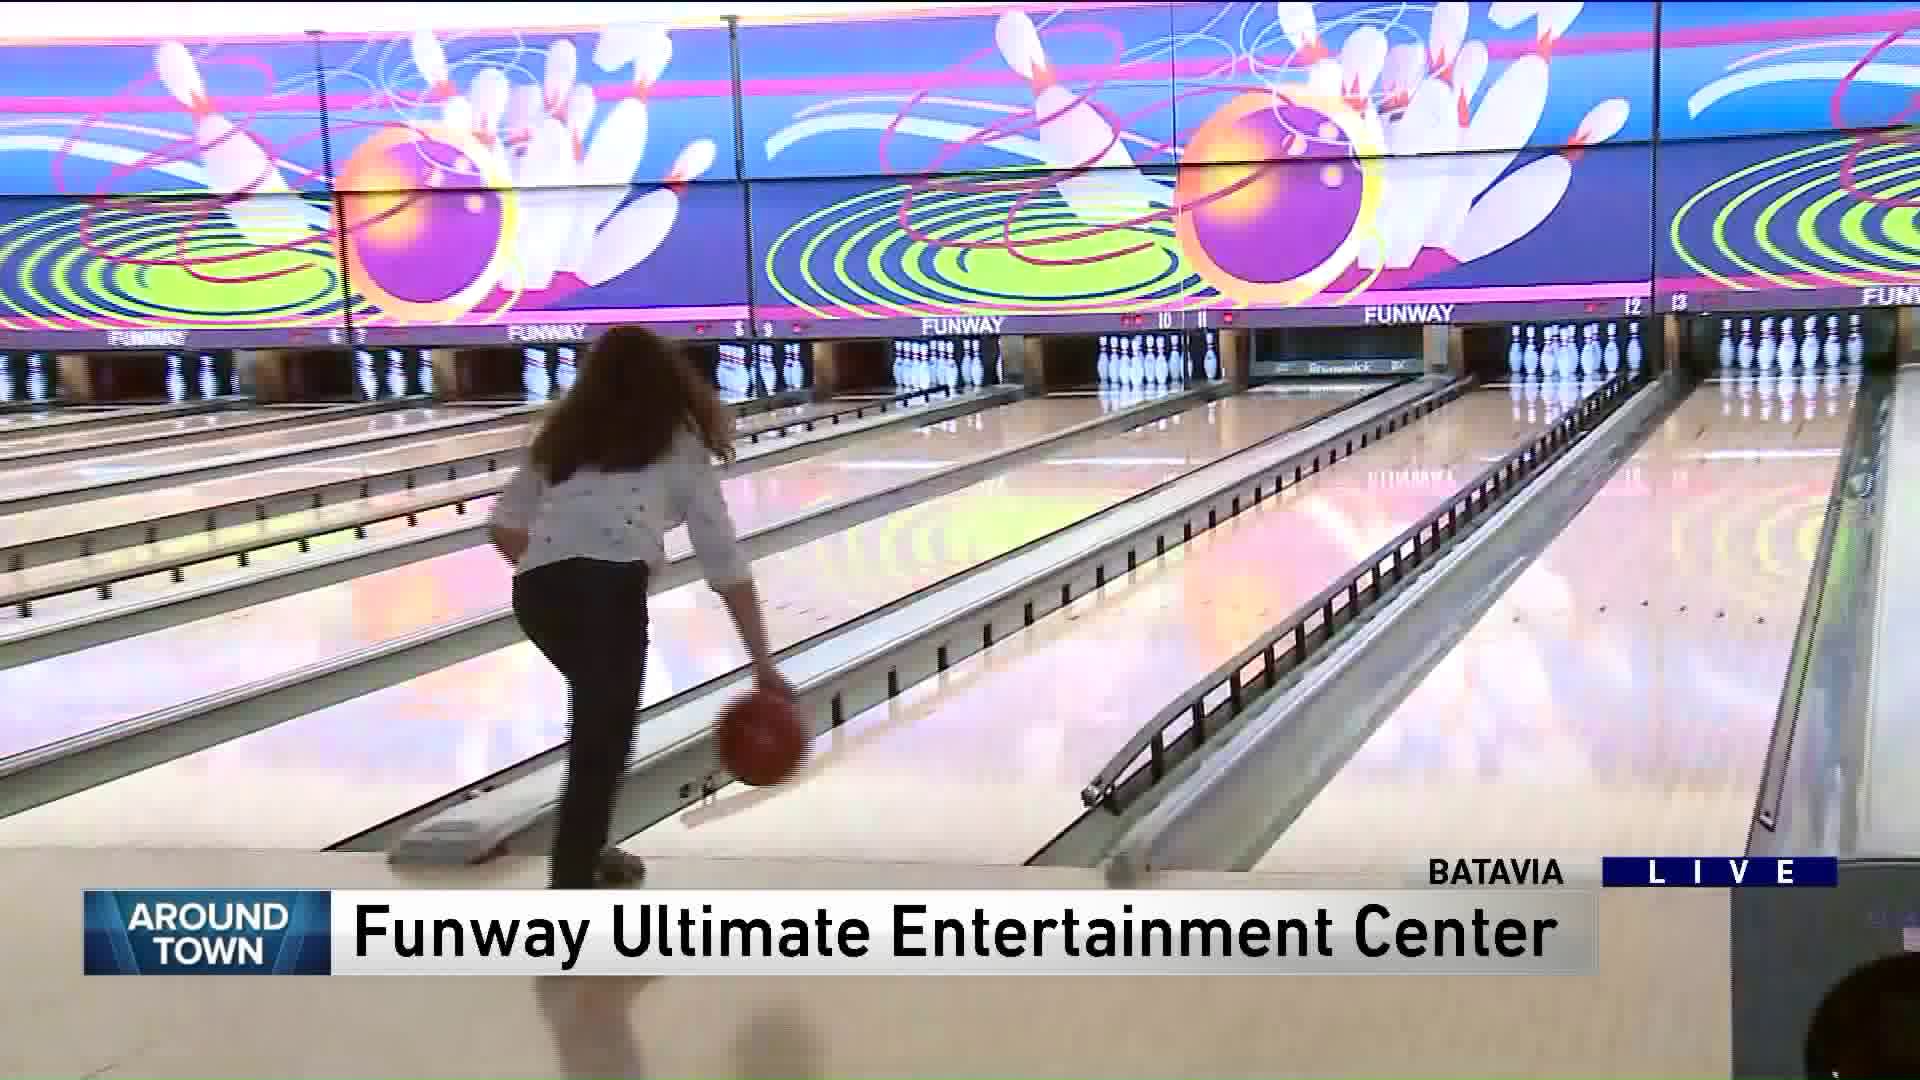 Around Town lets loose at Funway Entertainment Center